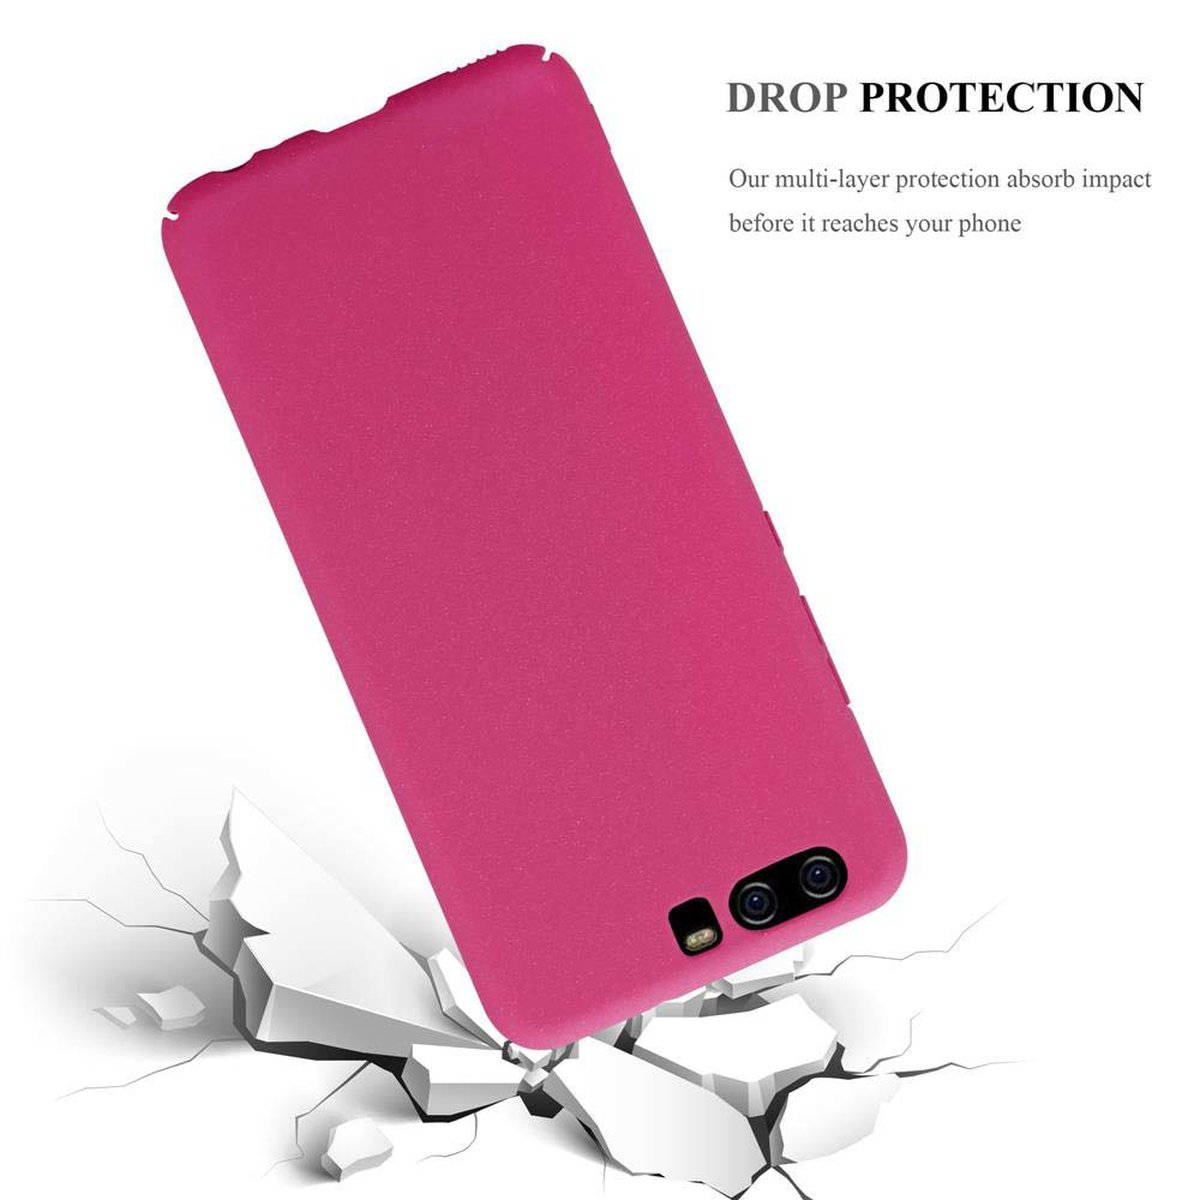 CADORABO Hülle im Hard Case Frosty PINK Huawei, P10, FROSTY Backcover, Style